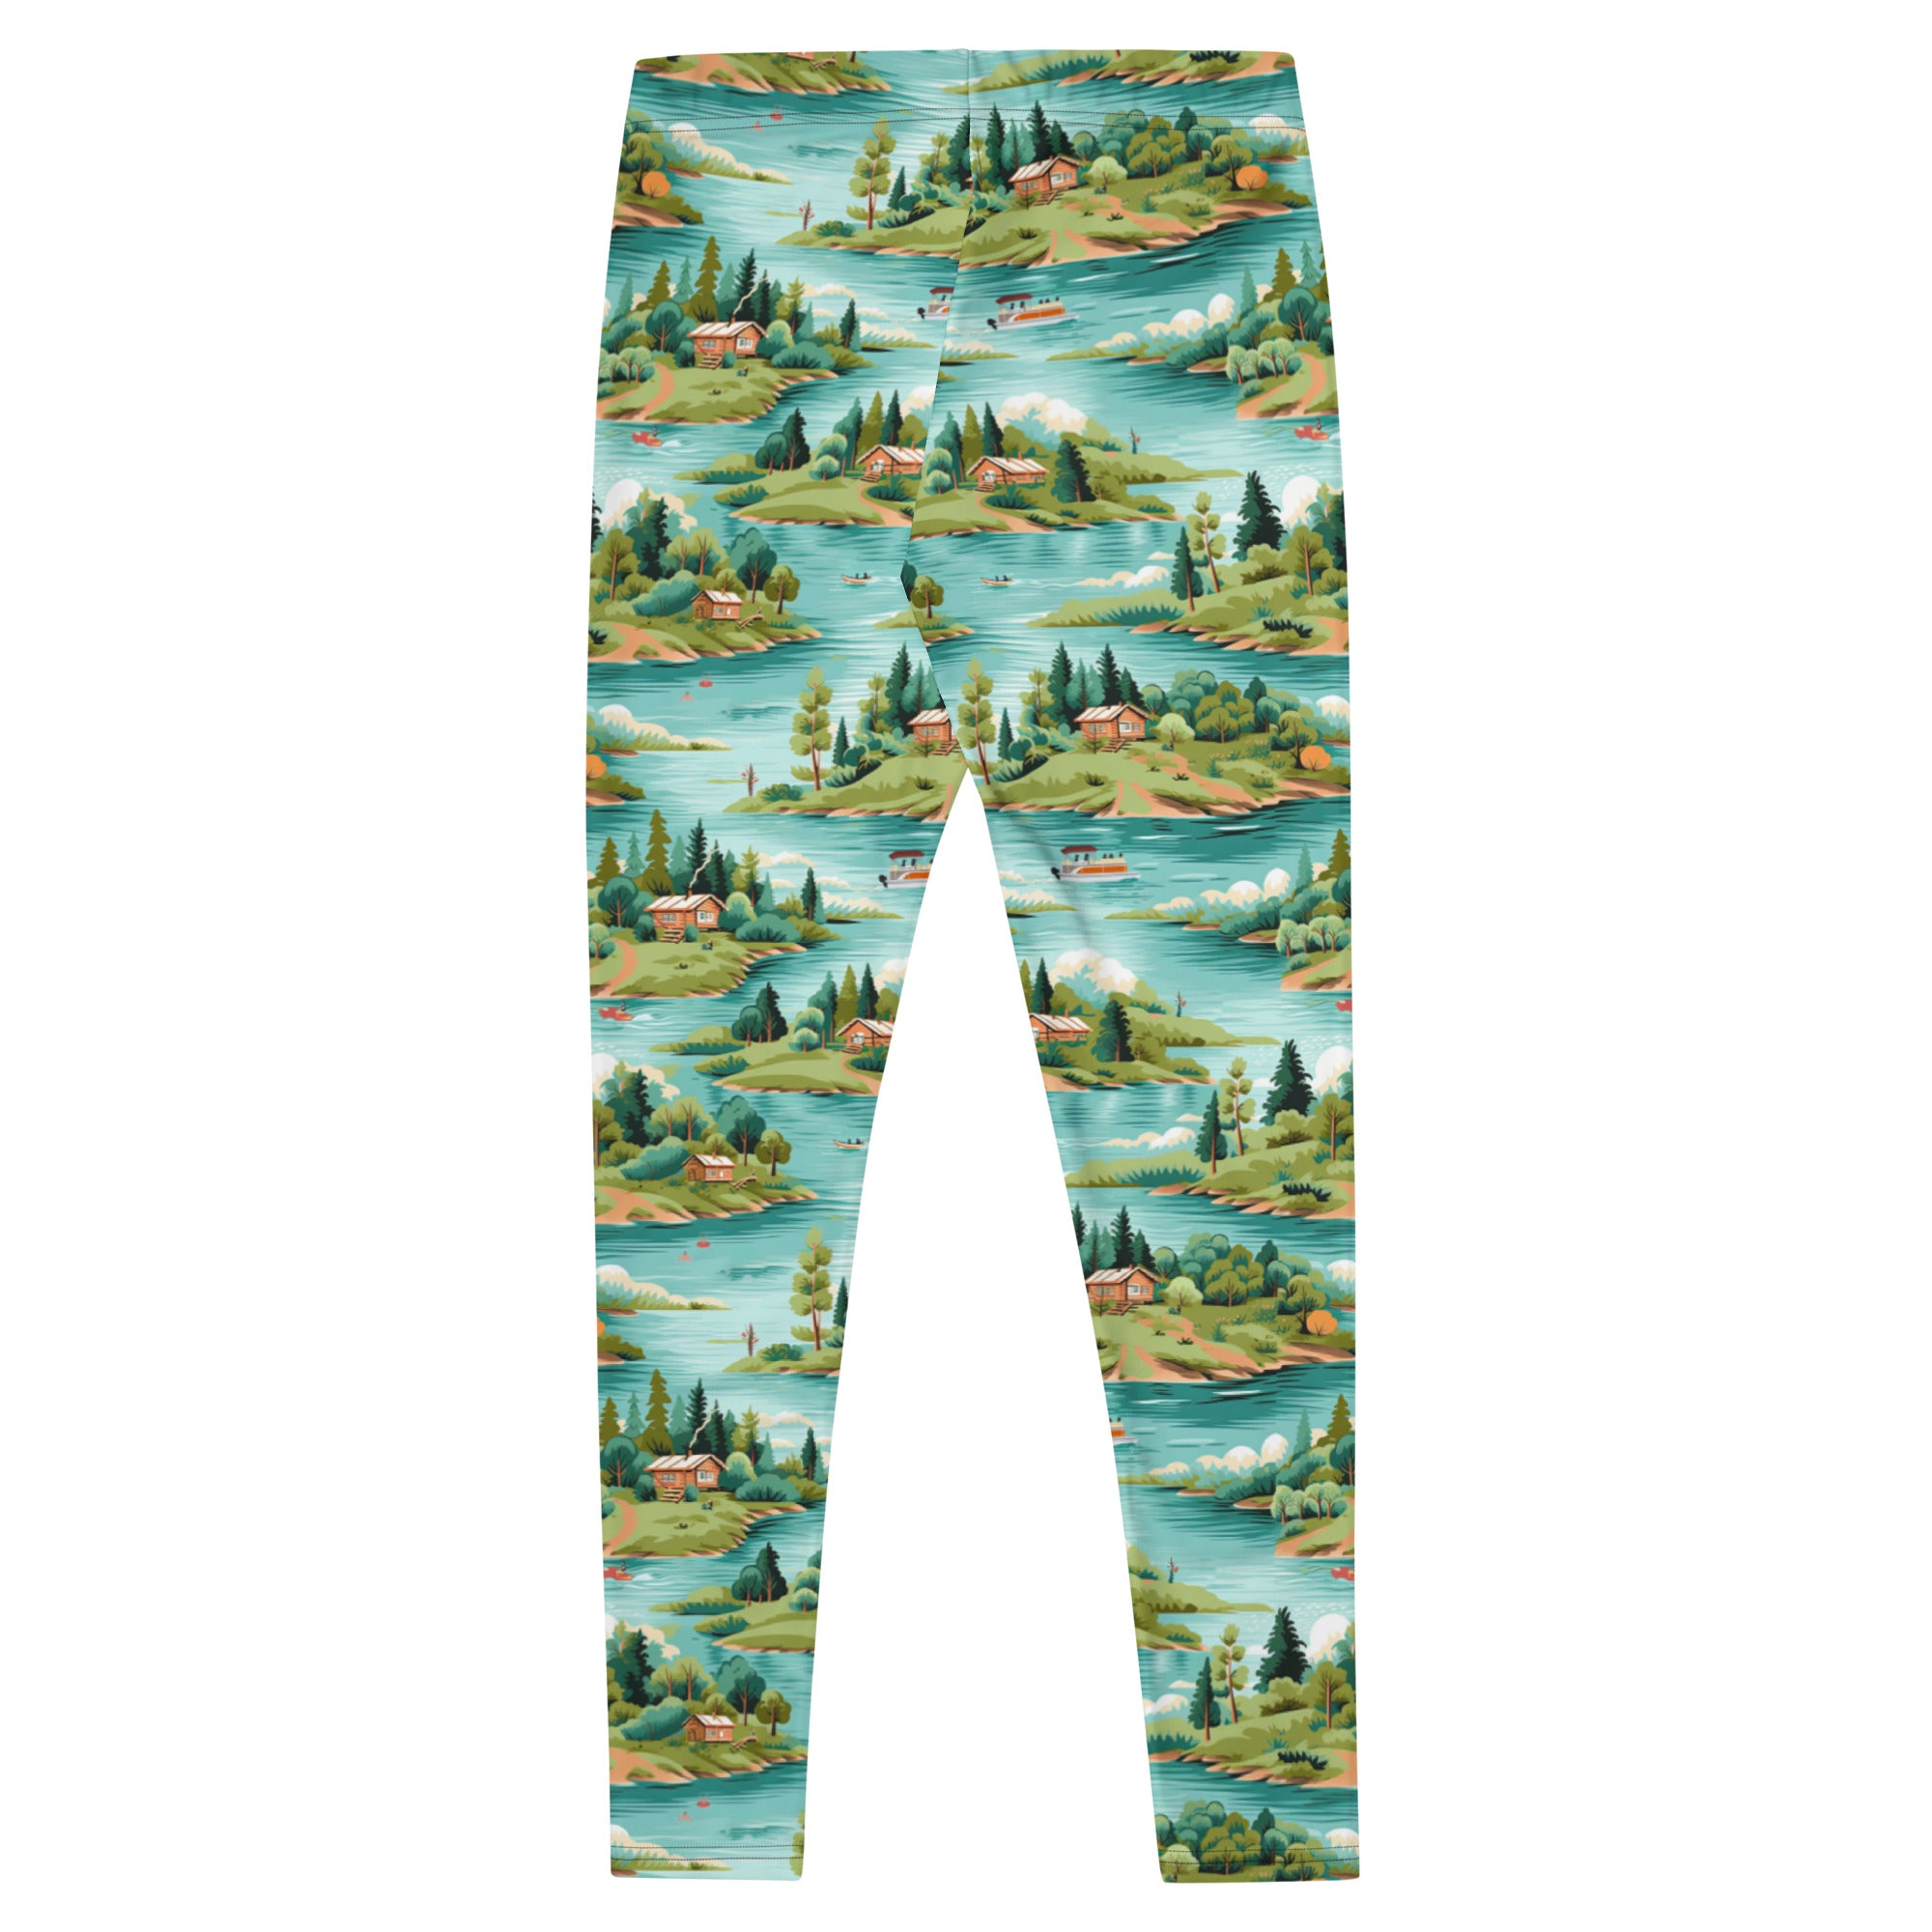 The Up North Leggings